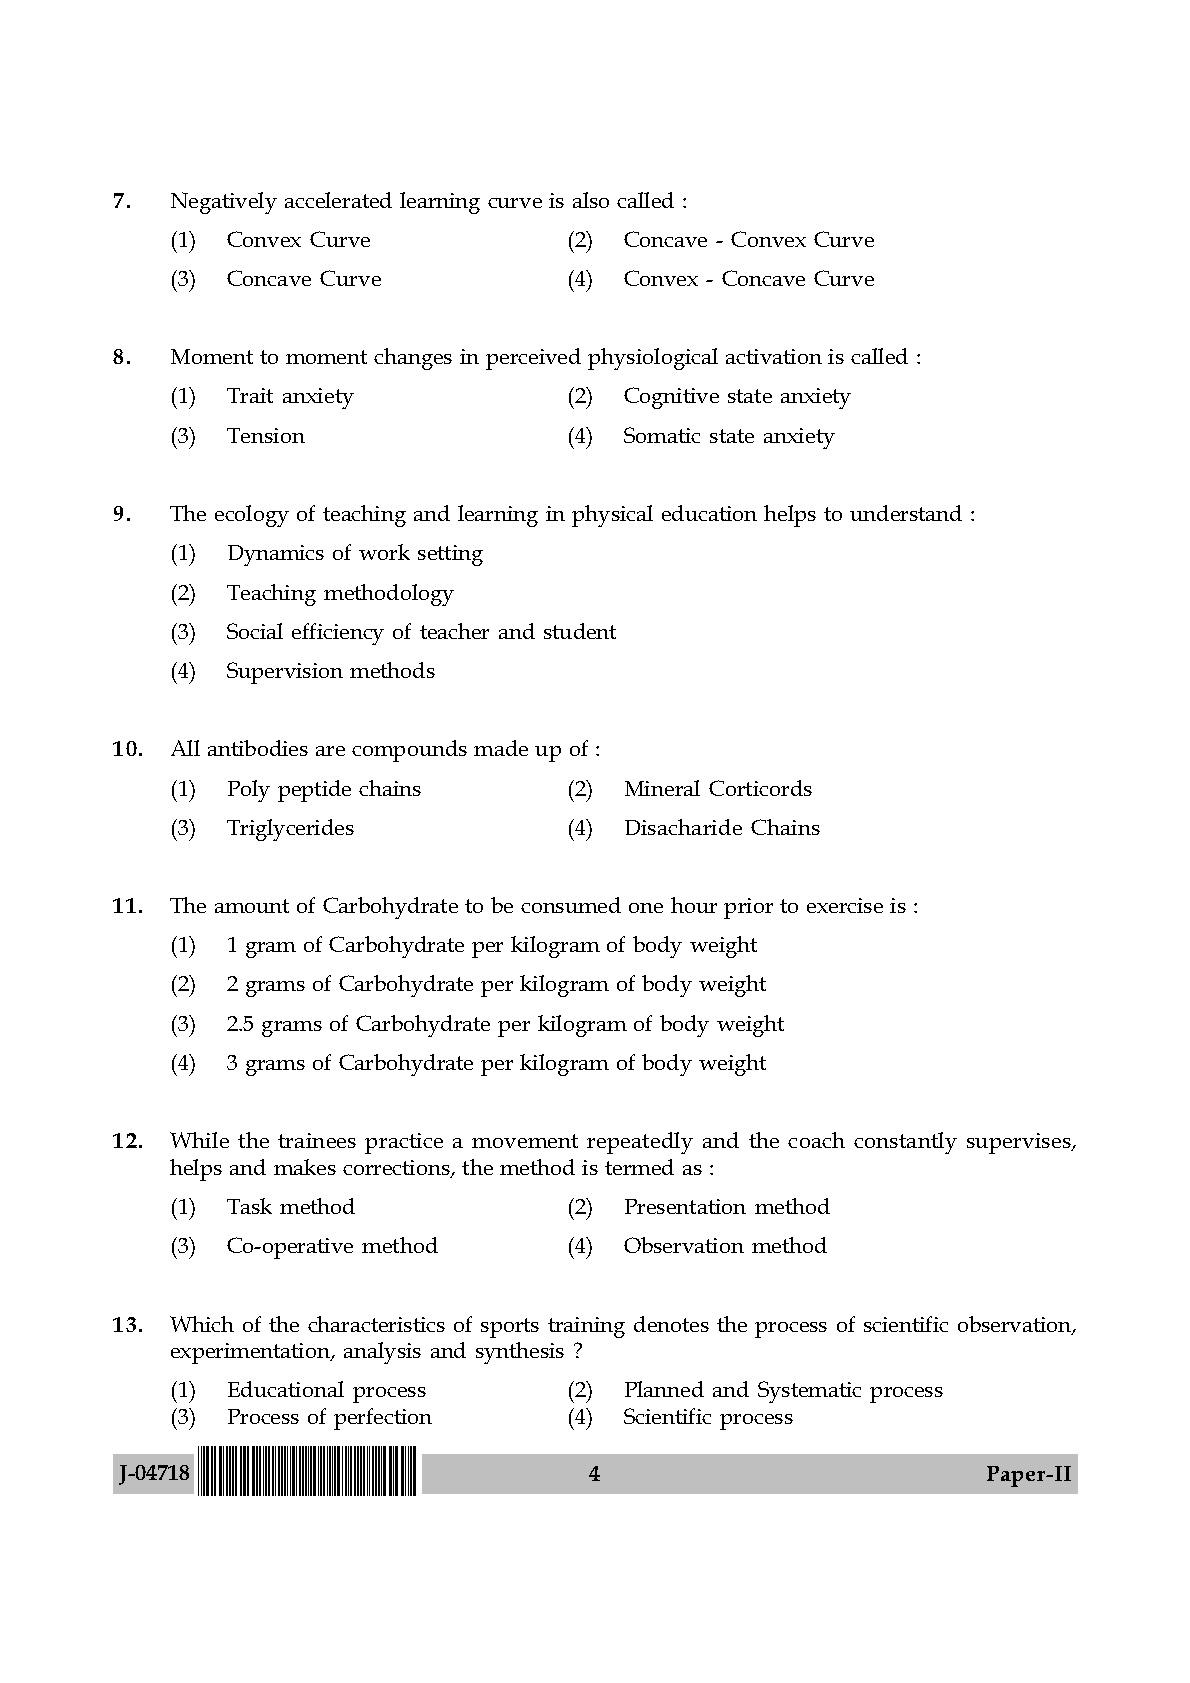 sample question paper of physical education class 11